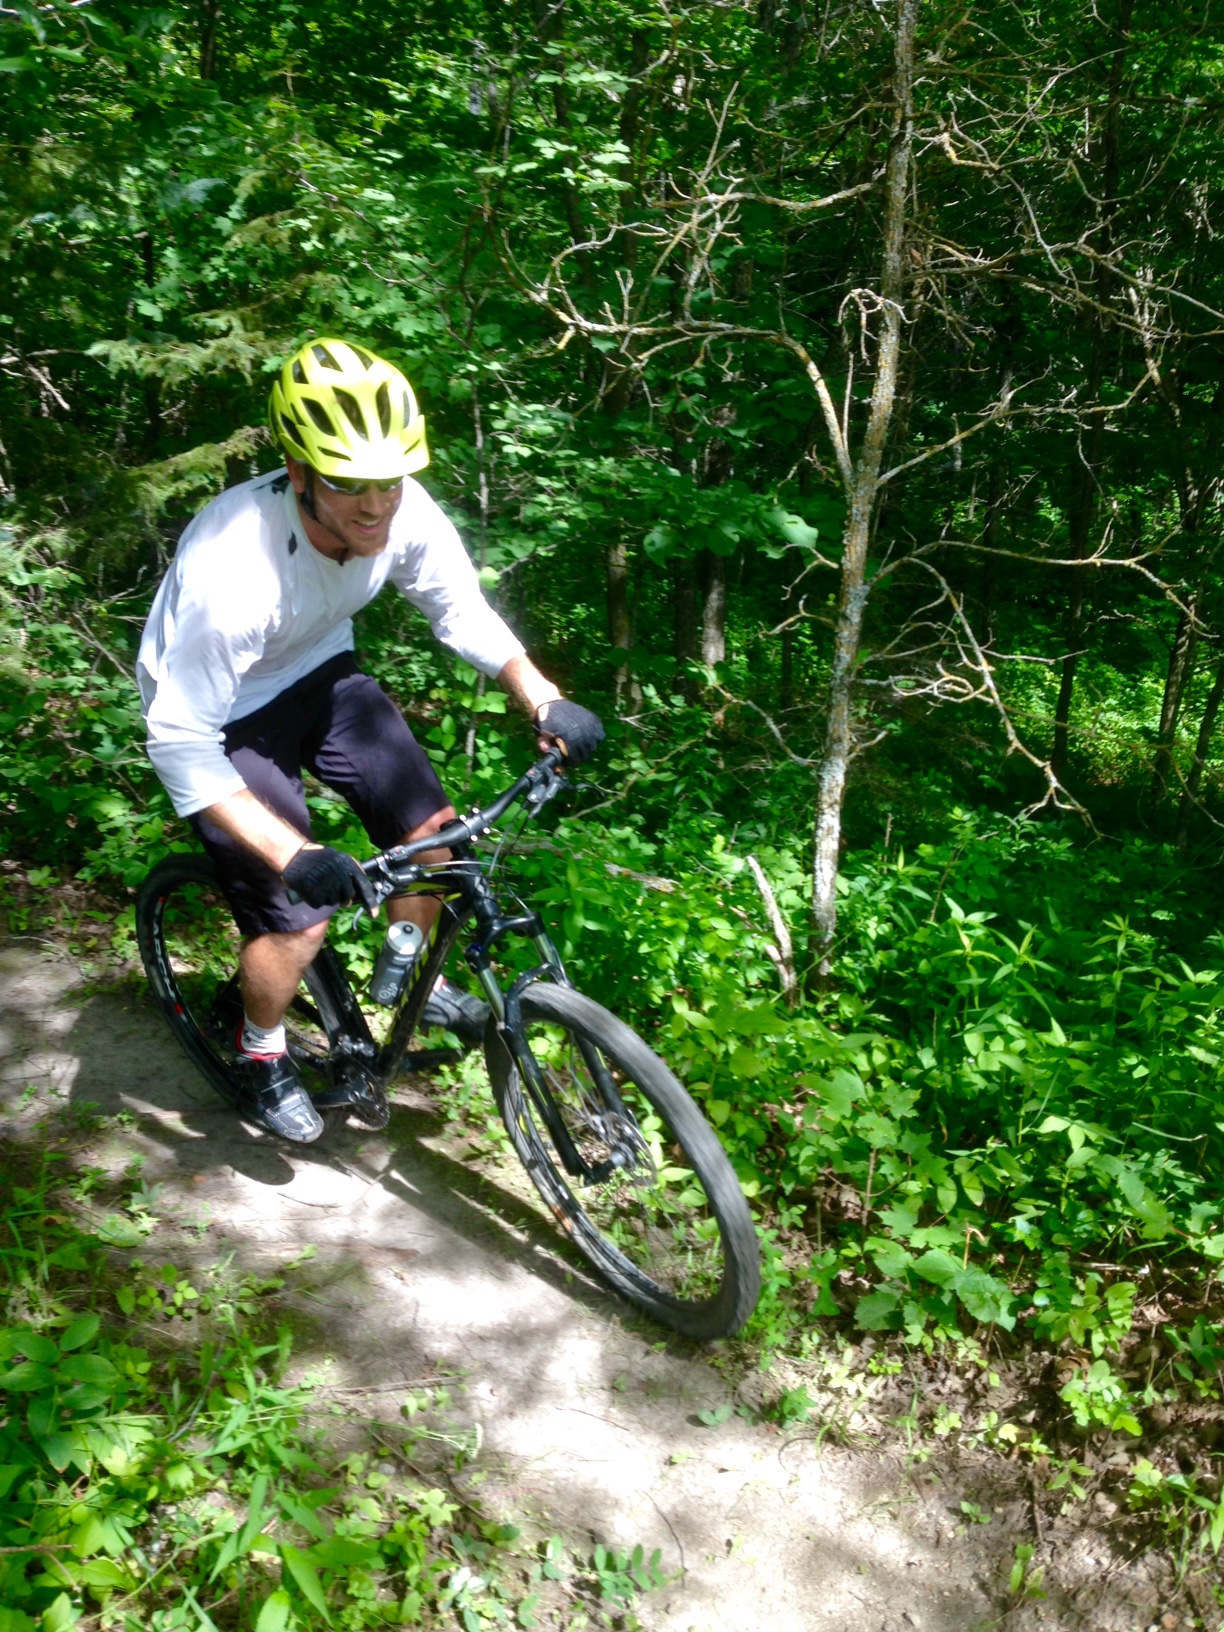 Eric Hahn riding on the mountain bike course, July 21st, 2015.